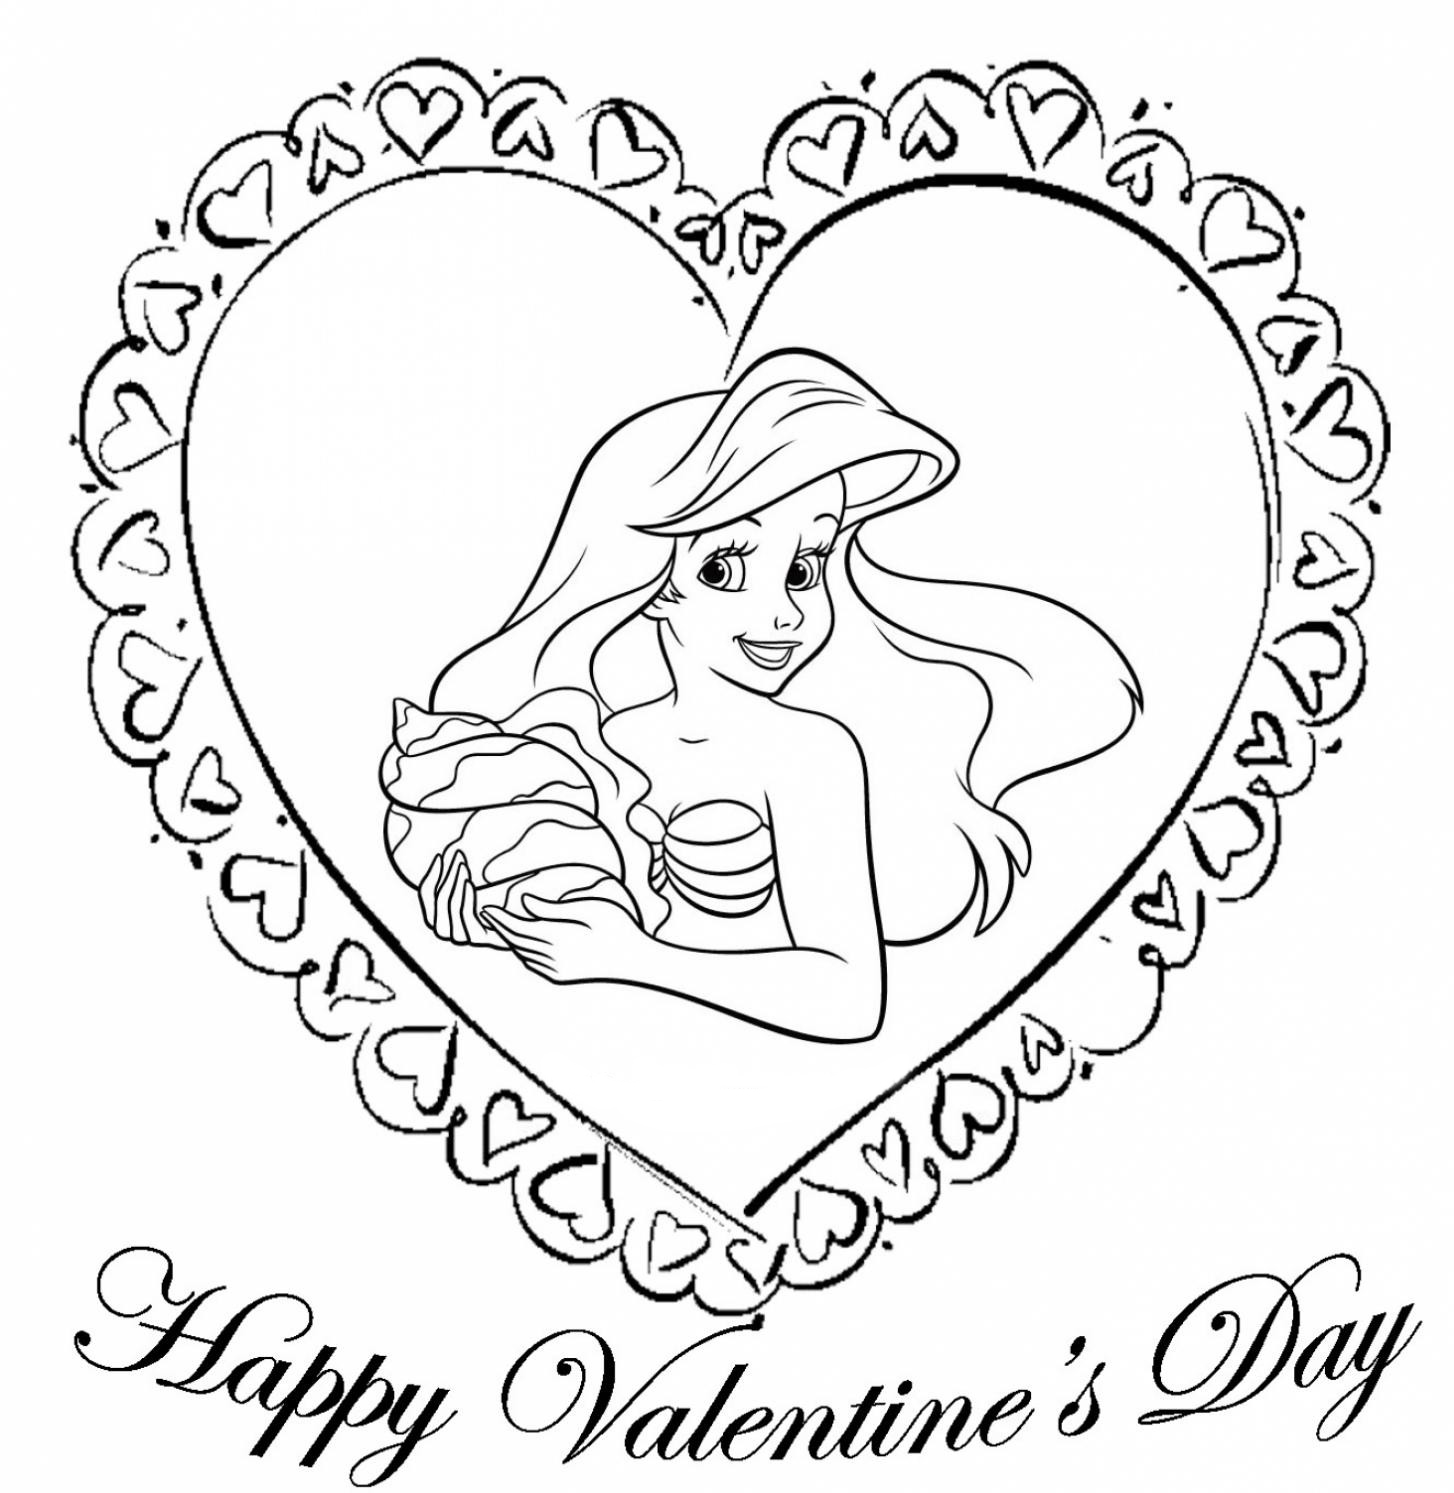 disney-valentines-day-coloring-pages